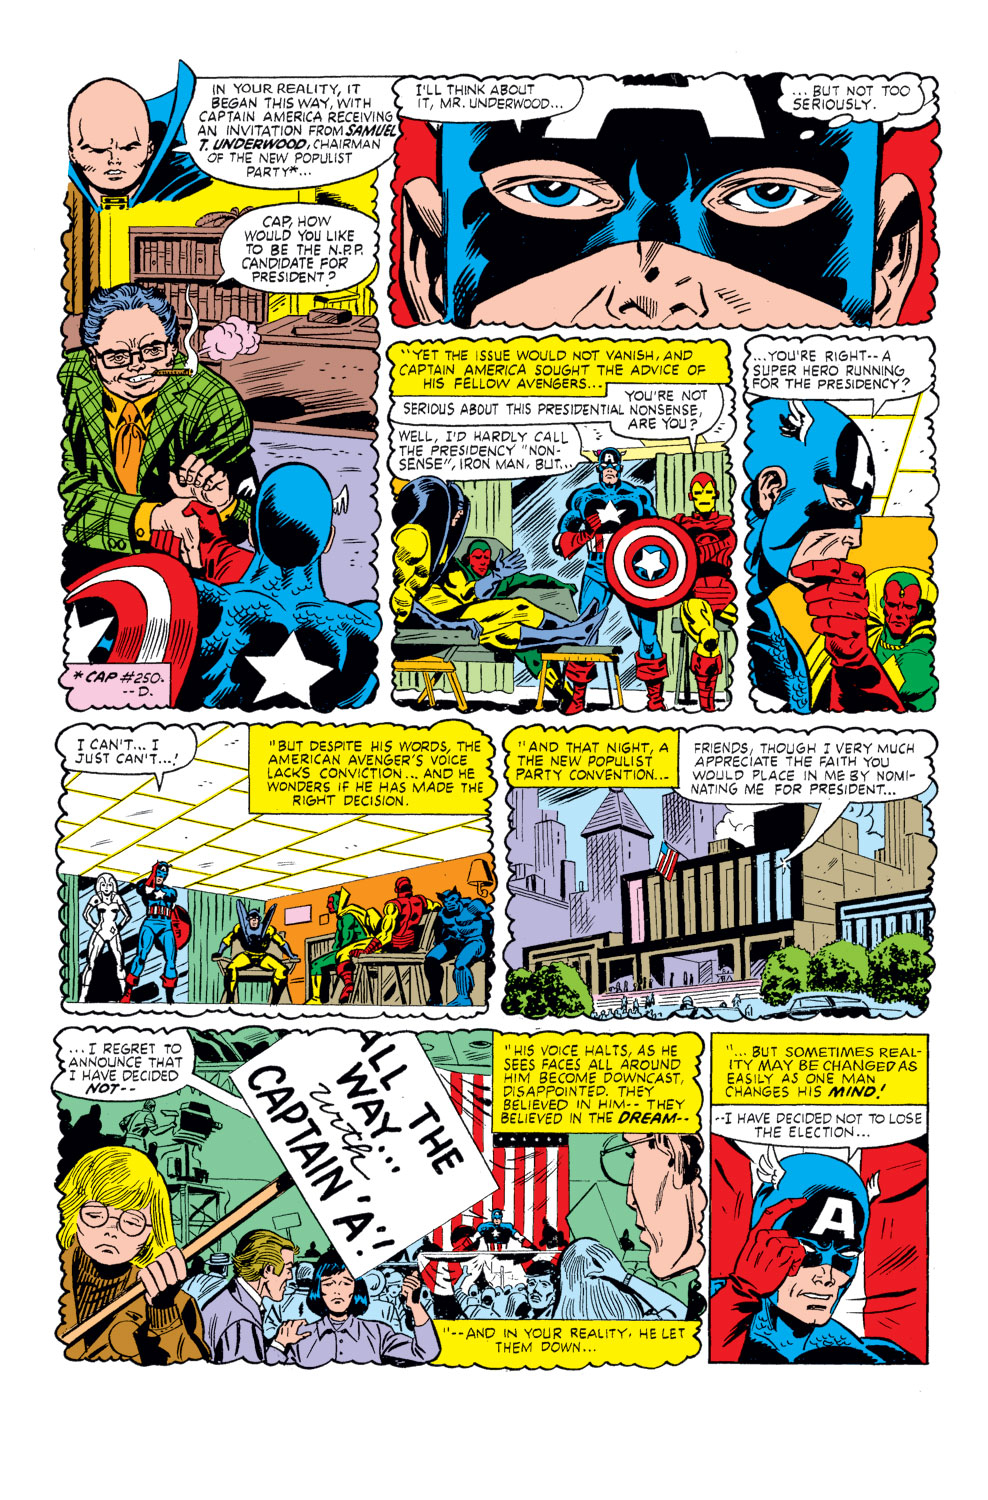 What If? (1977) issue 26 - Captain America had been elected president - Page 3